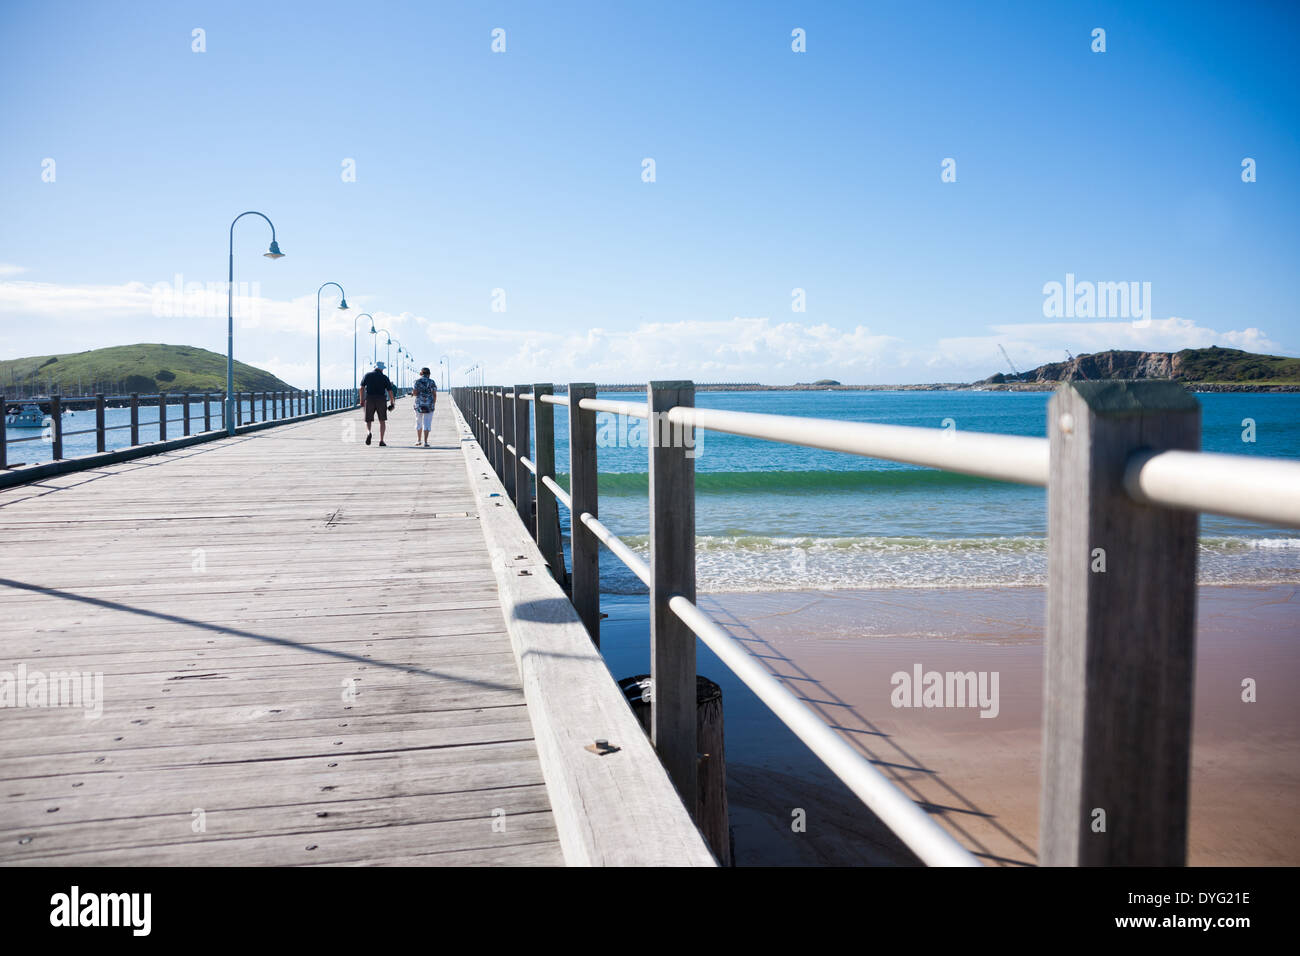 Two people walk out along the Long pier  at Coff's Harbour, Australia two people in March 2014. Stock Photo